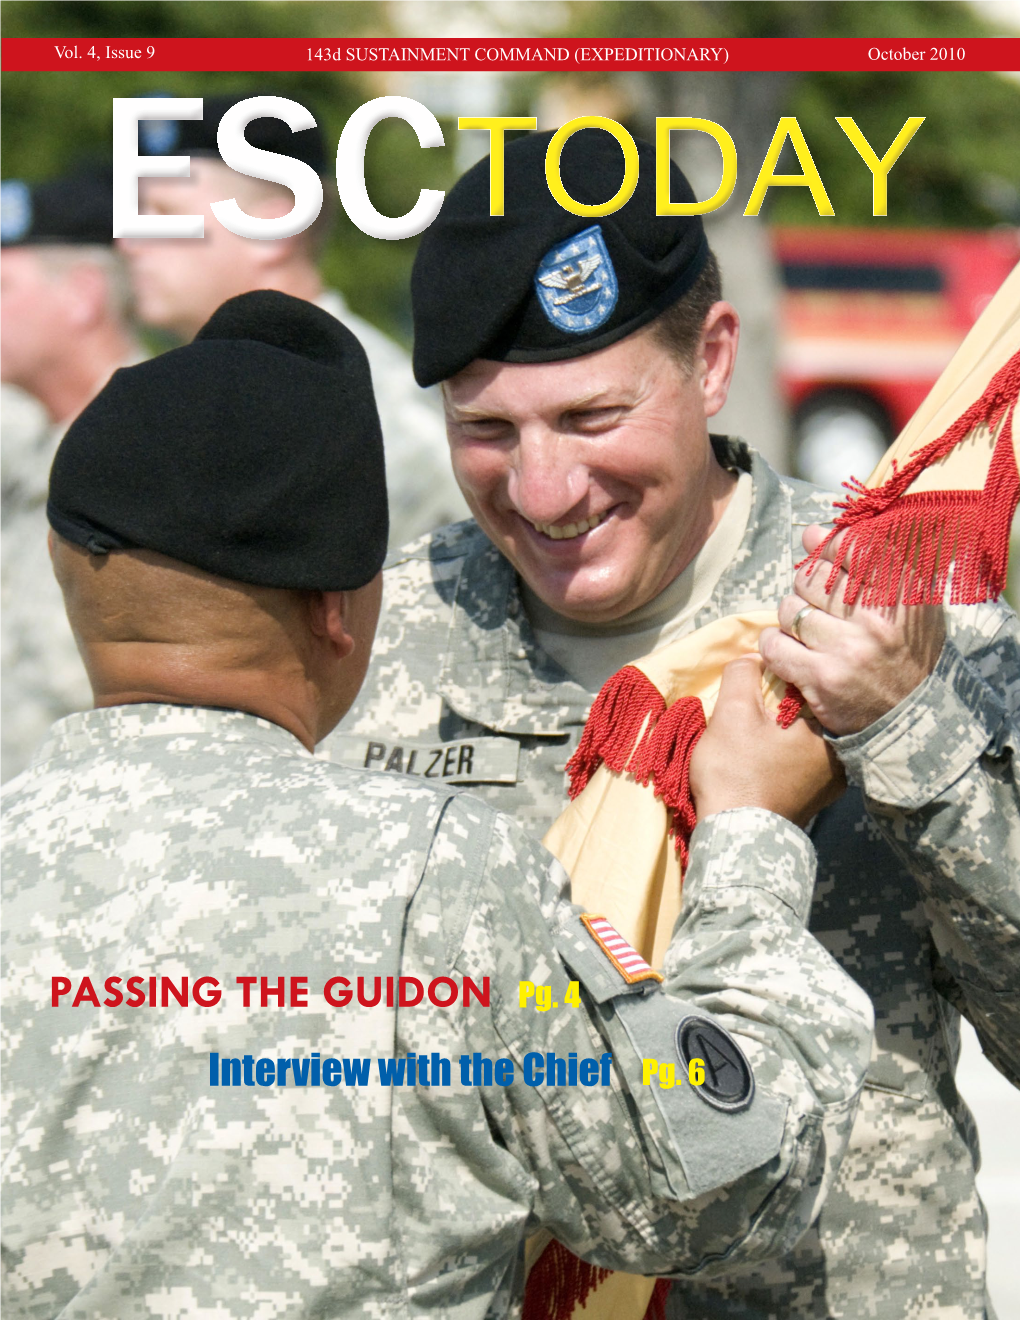 Passing the Guidon Pg. 4